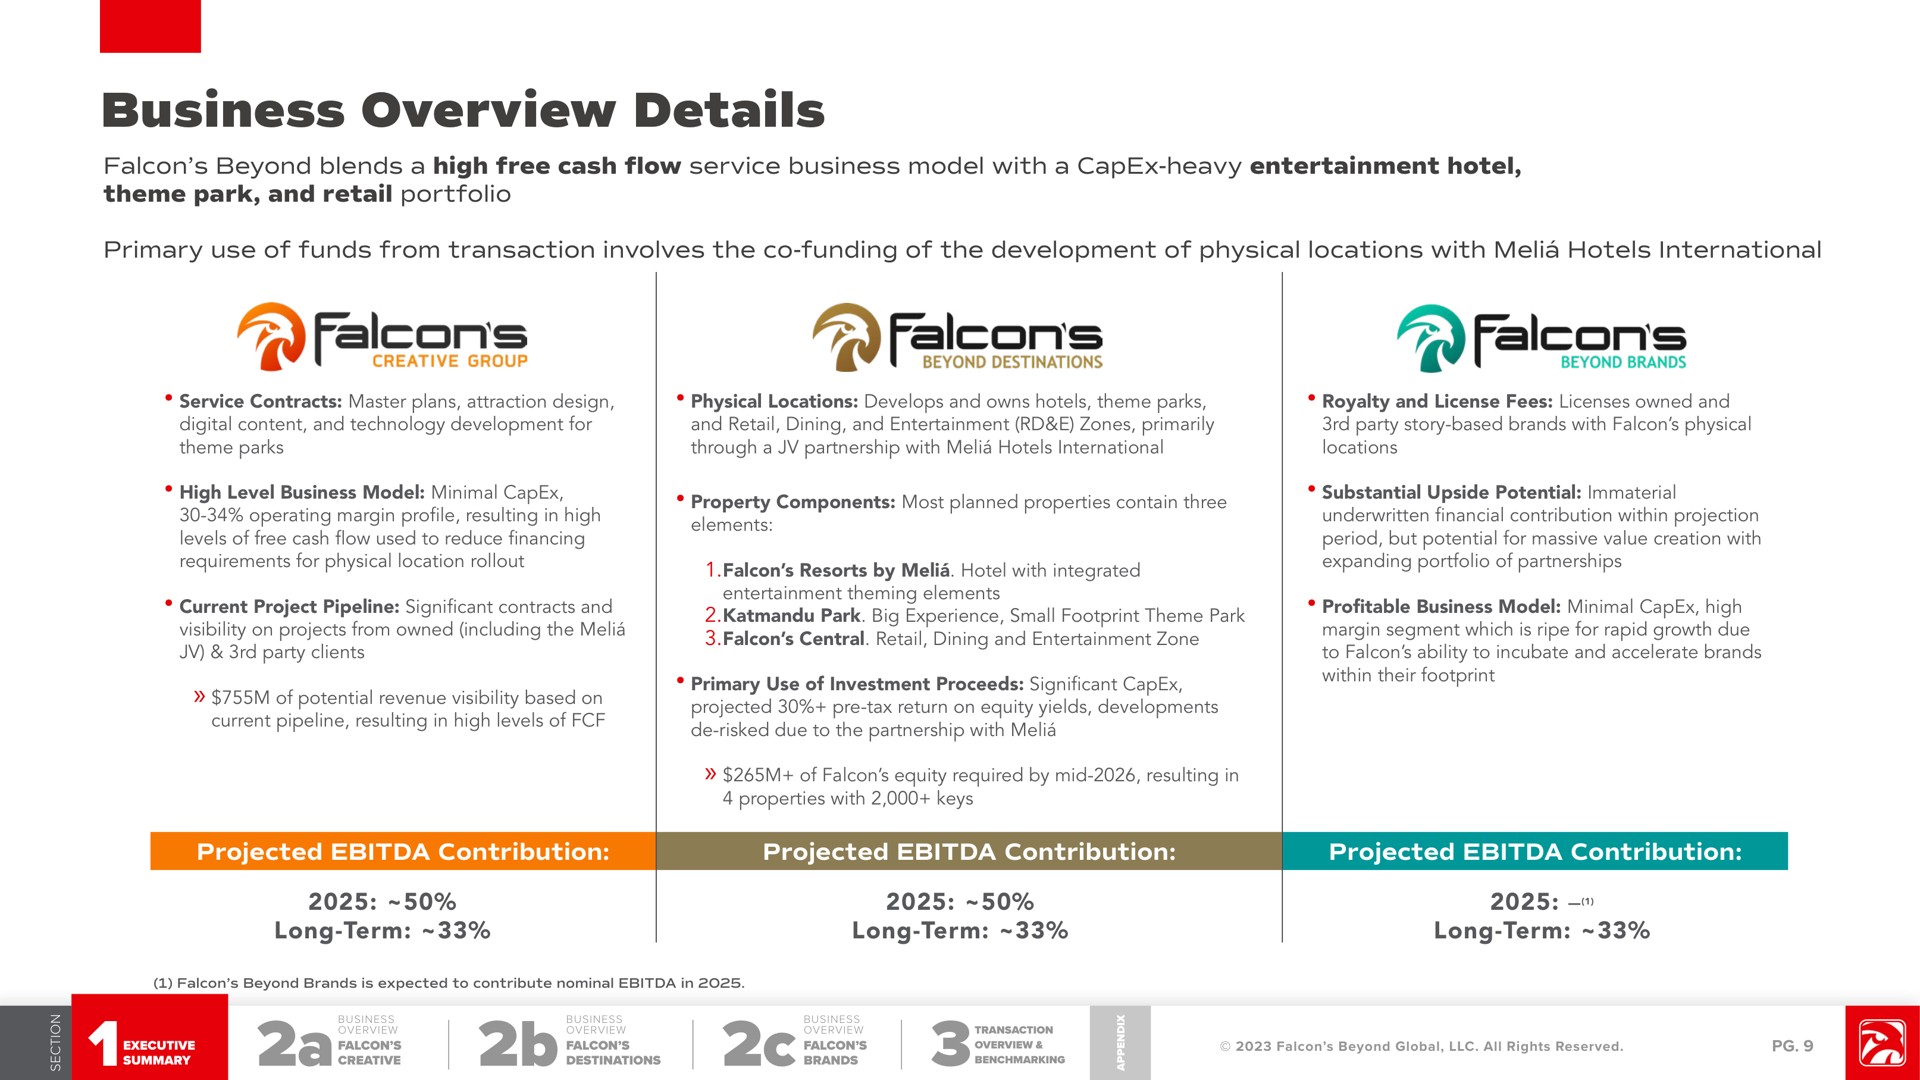 business overview details falcon beyond blends a high free cash flow service business model with a heavy entertainment hotel theme park and retail portfolio primary use of funds from transaction involves the funding of the development of physical locations with hotels international projected contribution projected contribution projected contribution long term long term long term falcons falcons falcons | Falcon's Beyond